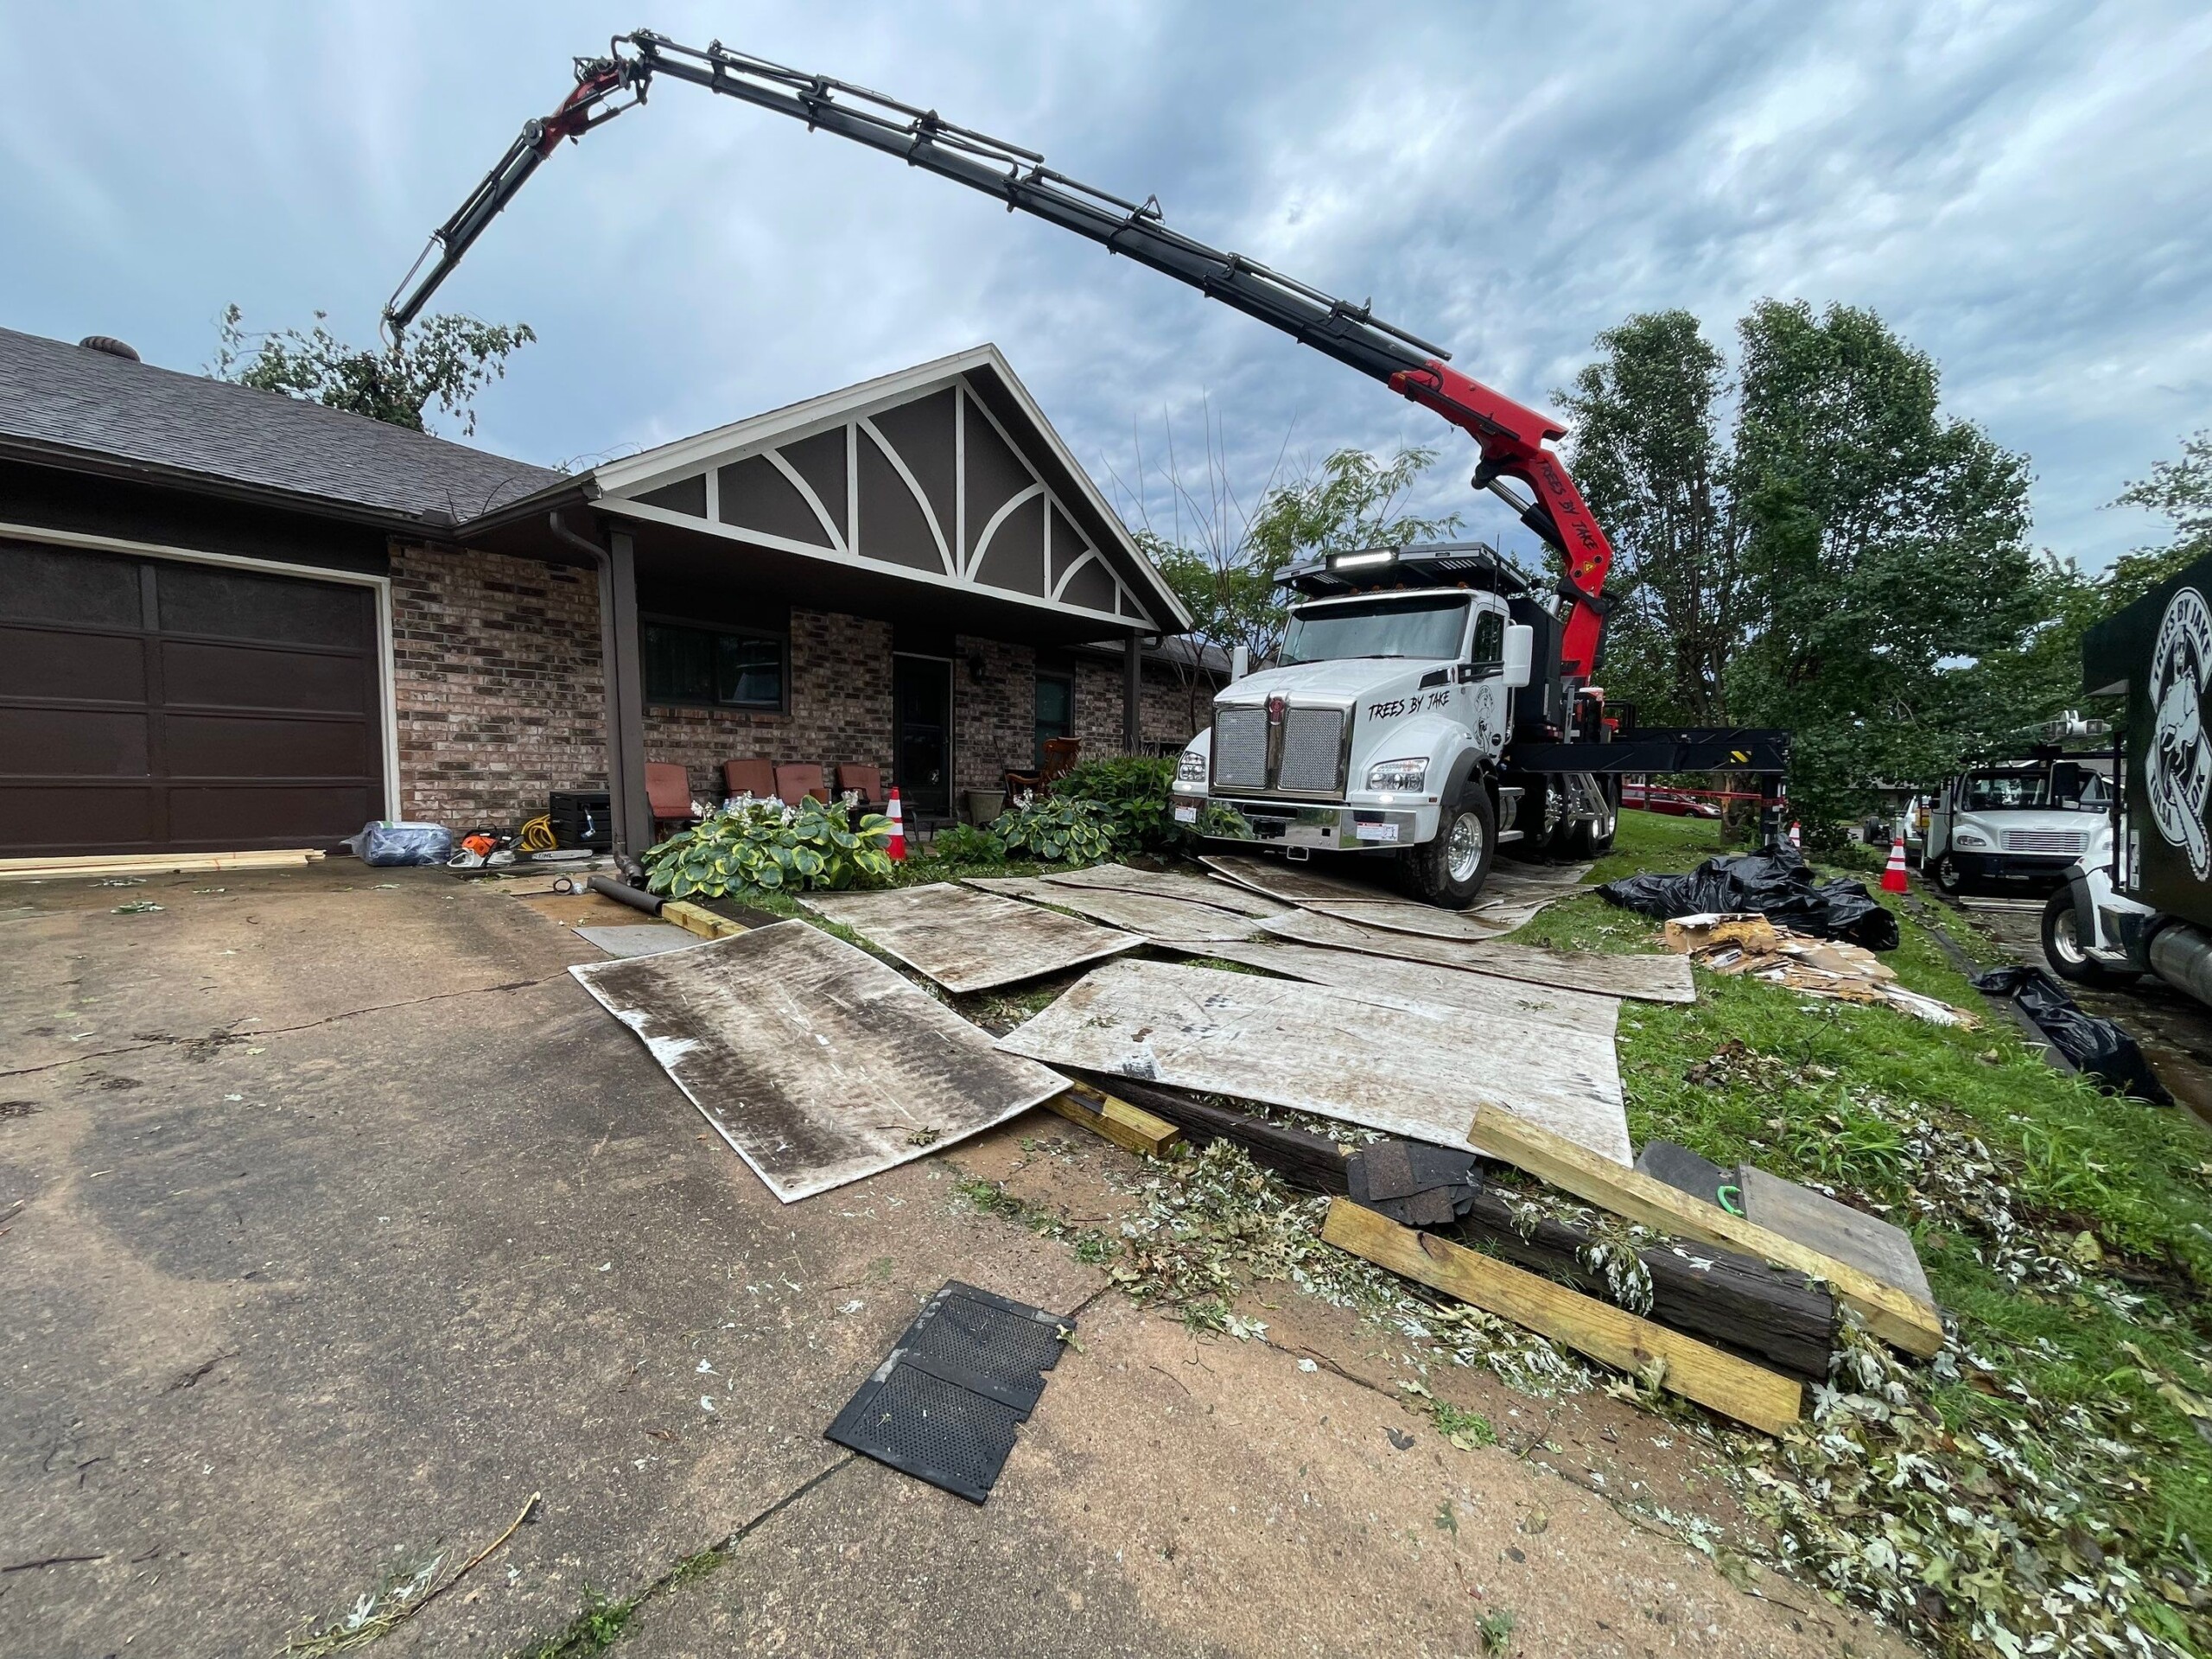 A truck with a large crane arm parked in front of a house with its roof partially torn off, debris and removed roof panels scattered on the ground. Tree branches and workers are visible in the background.